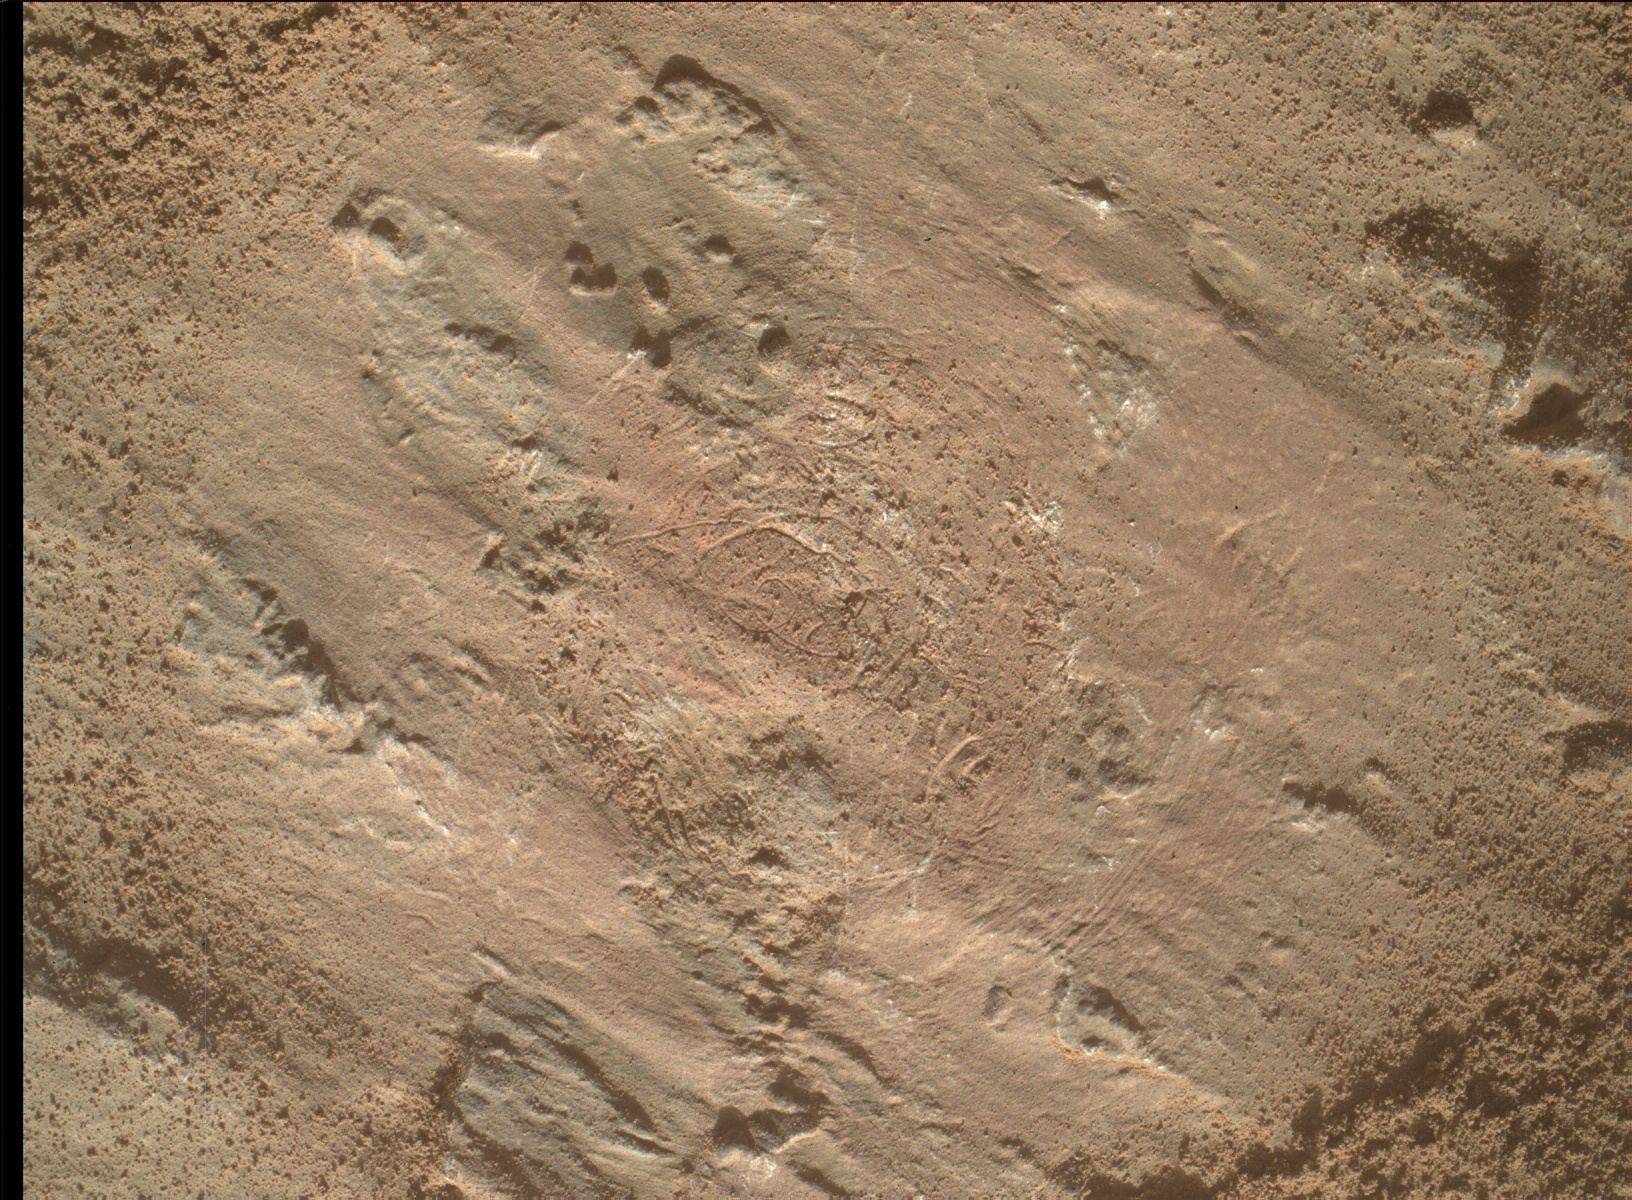 Nasa's Mars rover Curiosity acquired this image using its Mars Hand Lens Imager (MAHLI) on Sol 3201